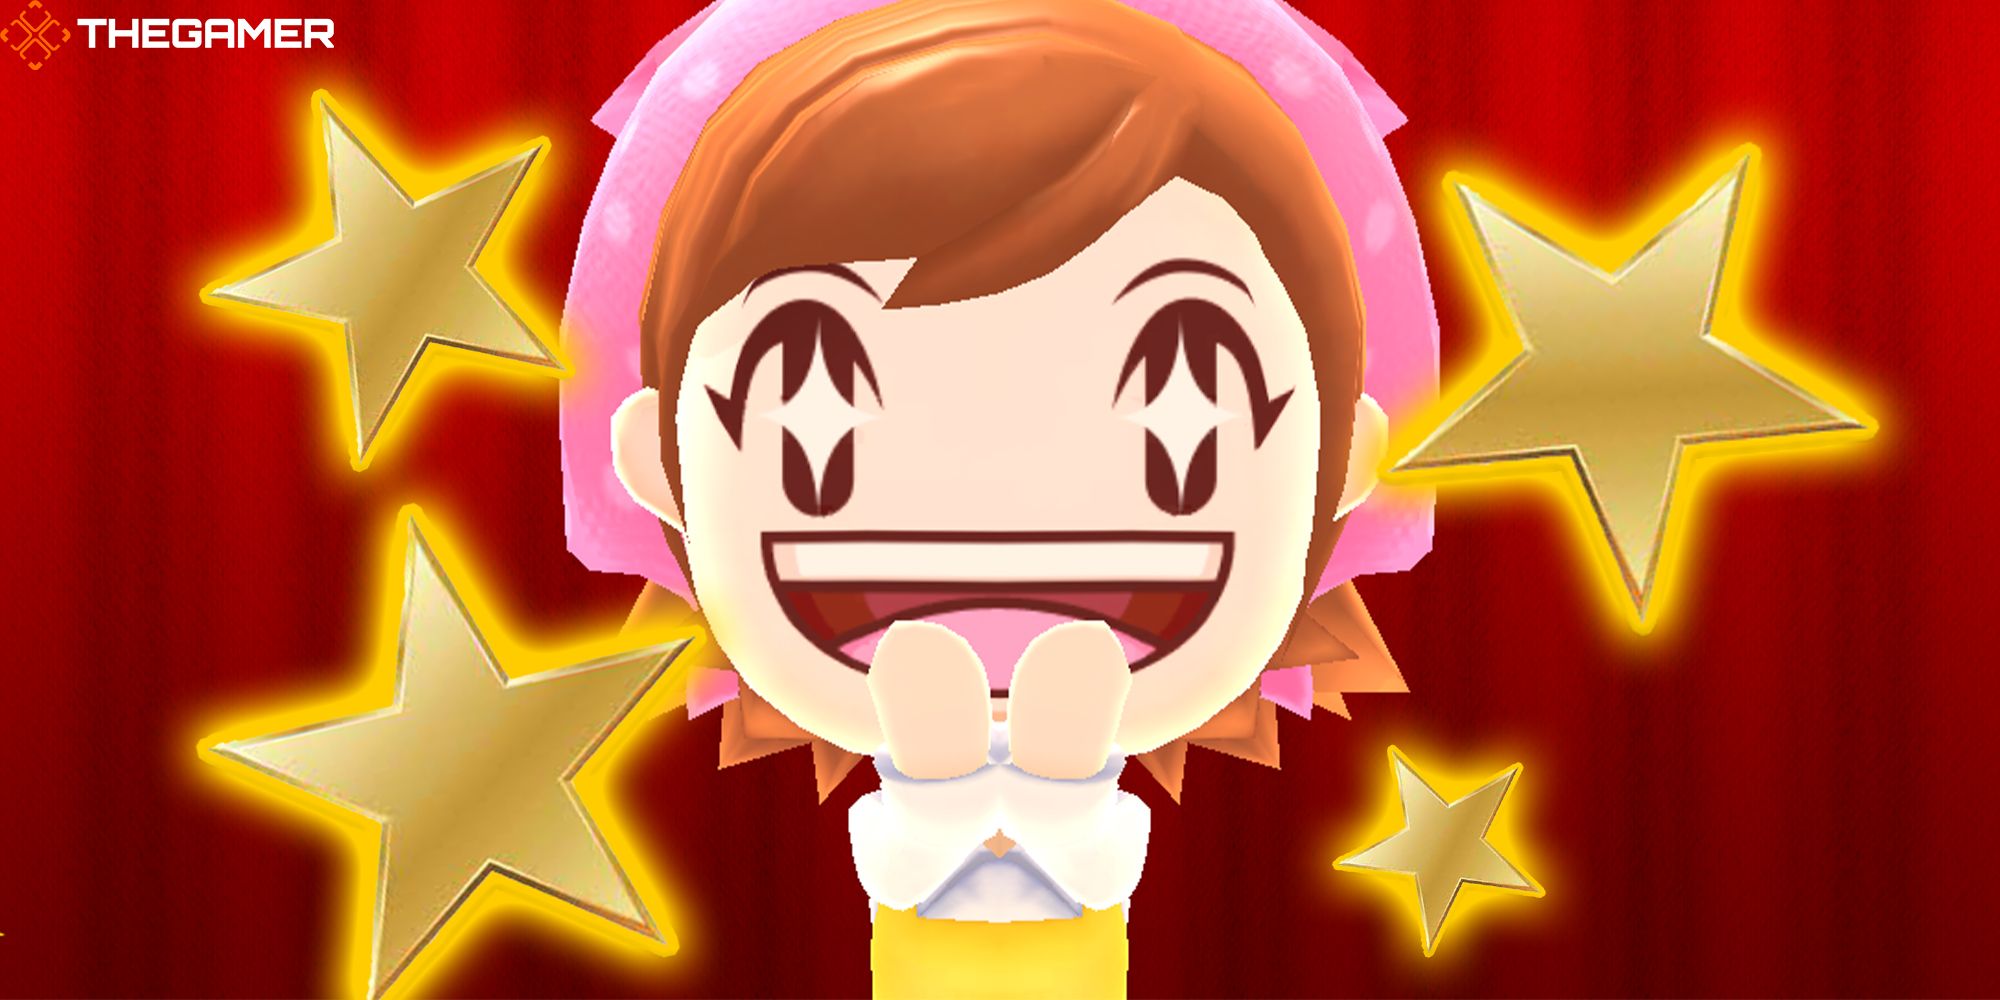 Stars surround Cooking Mama, who stands in awe of your cooking prowess in front of a red curtain in Cooking Mama: Cuisine!